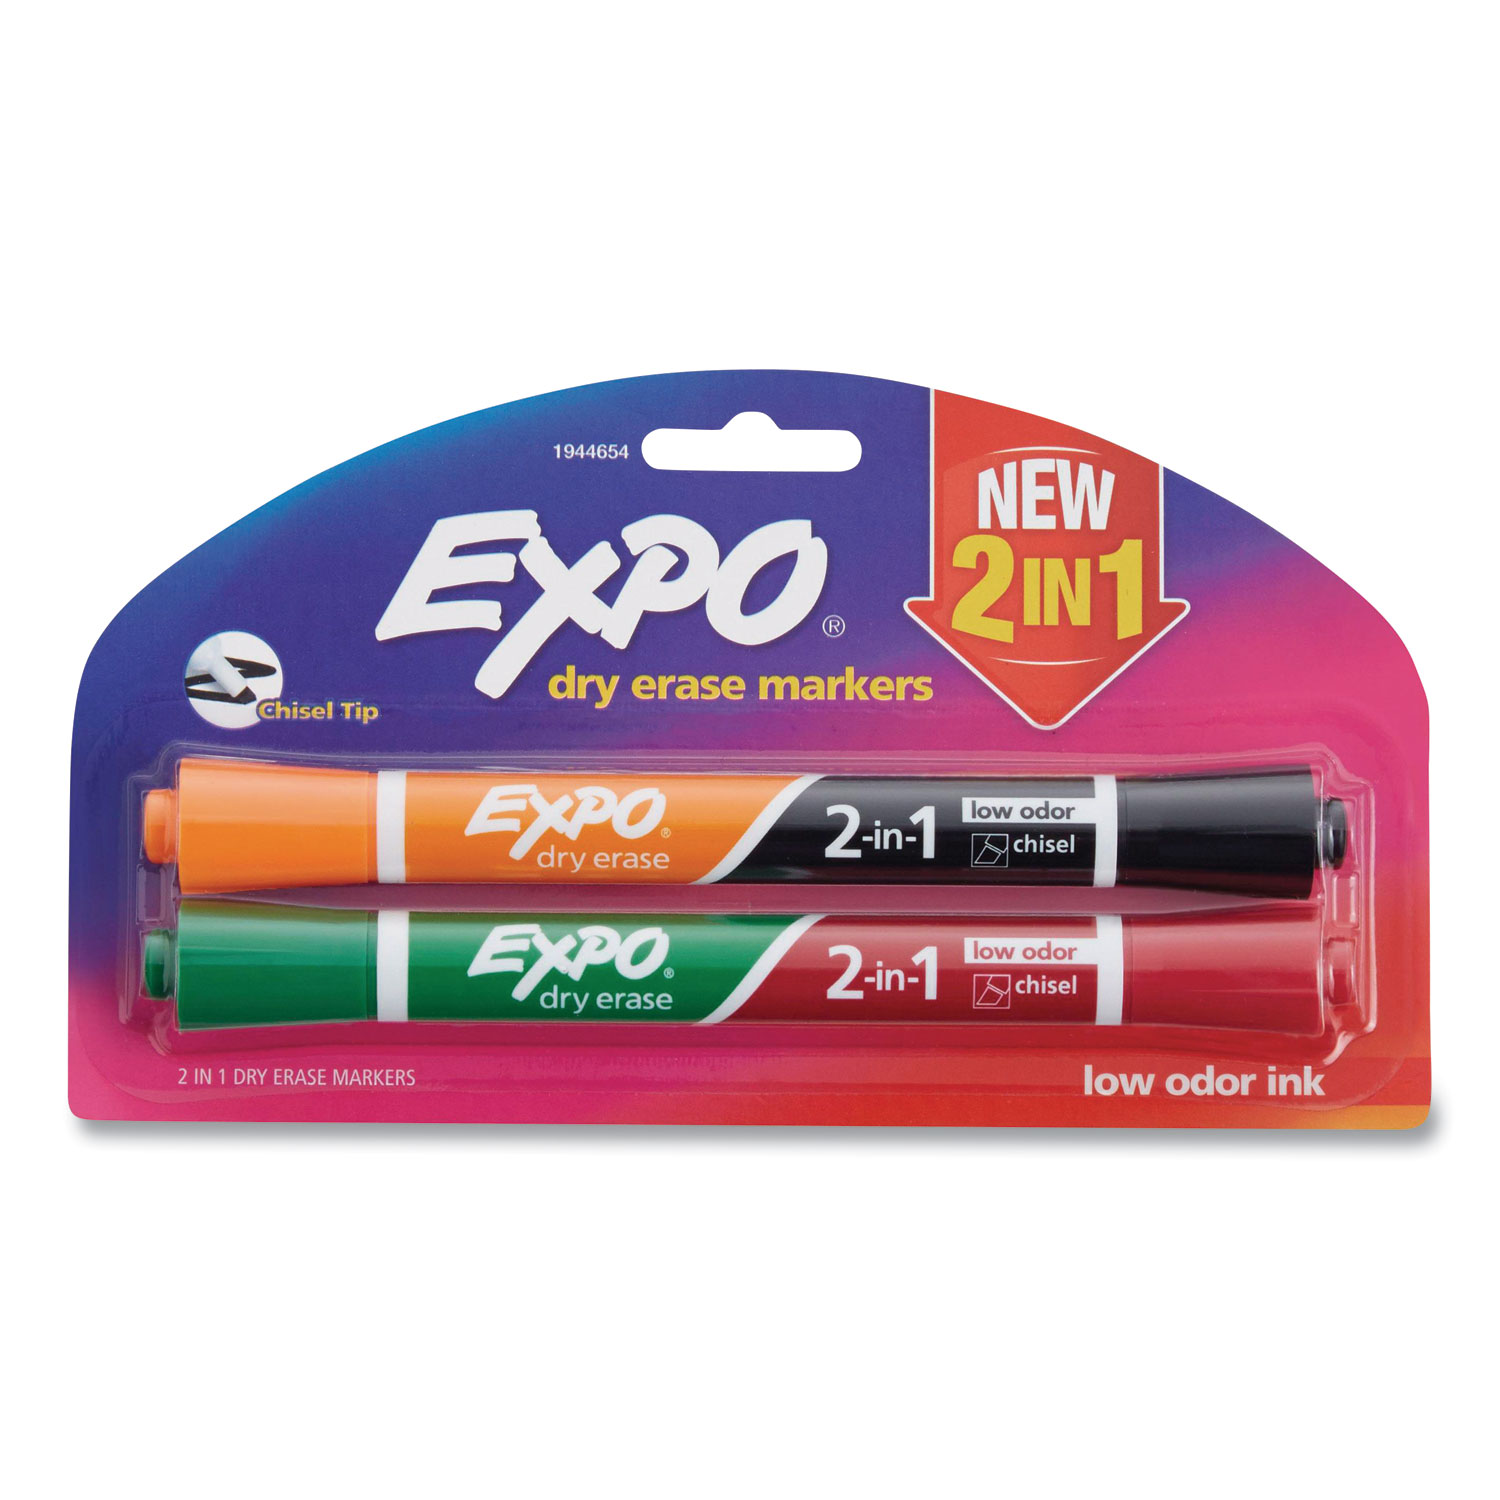  EXPO 1944654 2-in-1 Dry Erase Markers, Medium Chisel Tip, Assorted Colors, 2/Pack (SAN1989945) 